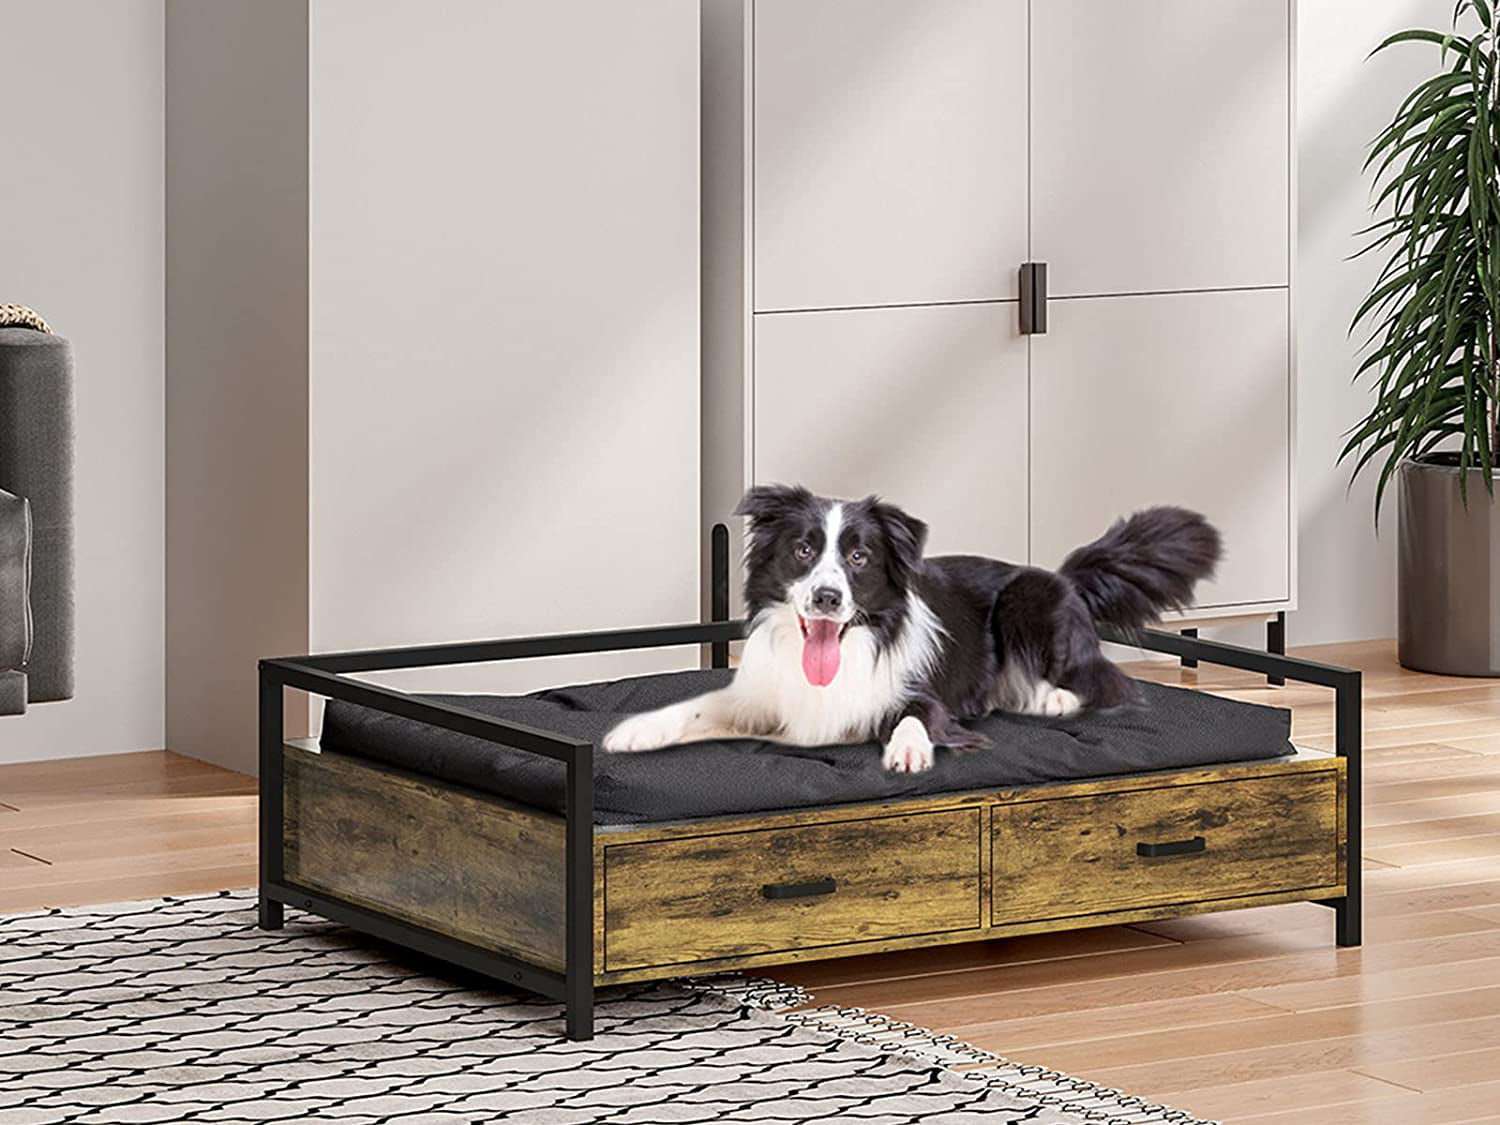 Dogs Cats Sofa Chair with Drawer Modern Style Wood and Iron Frame Dog Furniture MSMASK Elevated Dog Beds Frame 